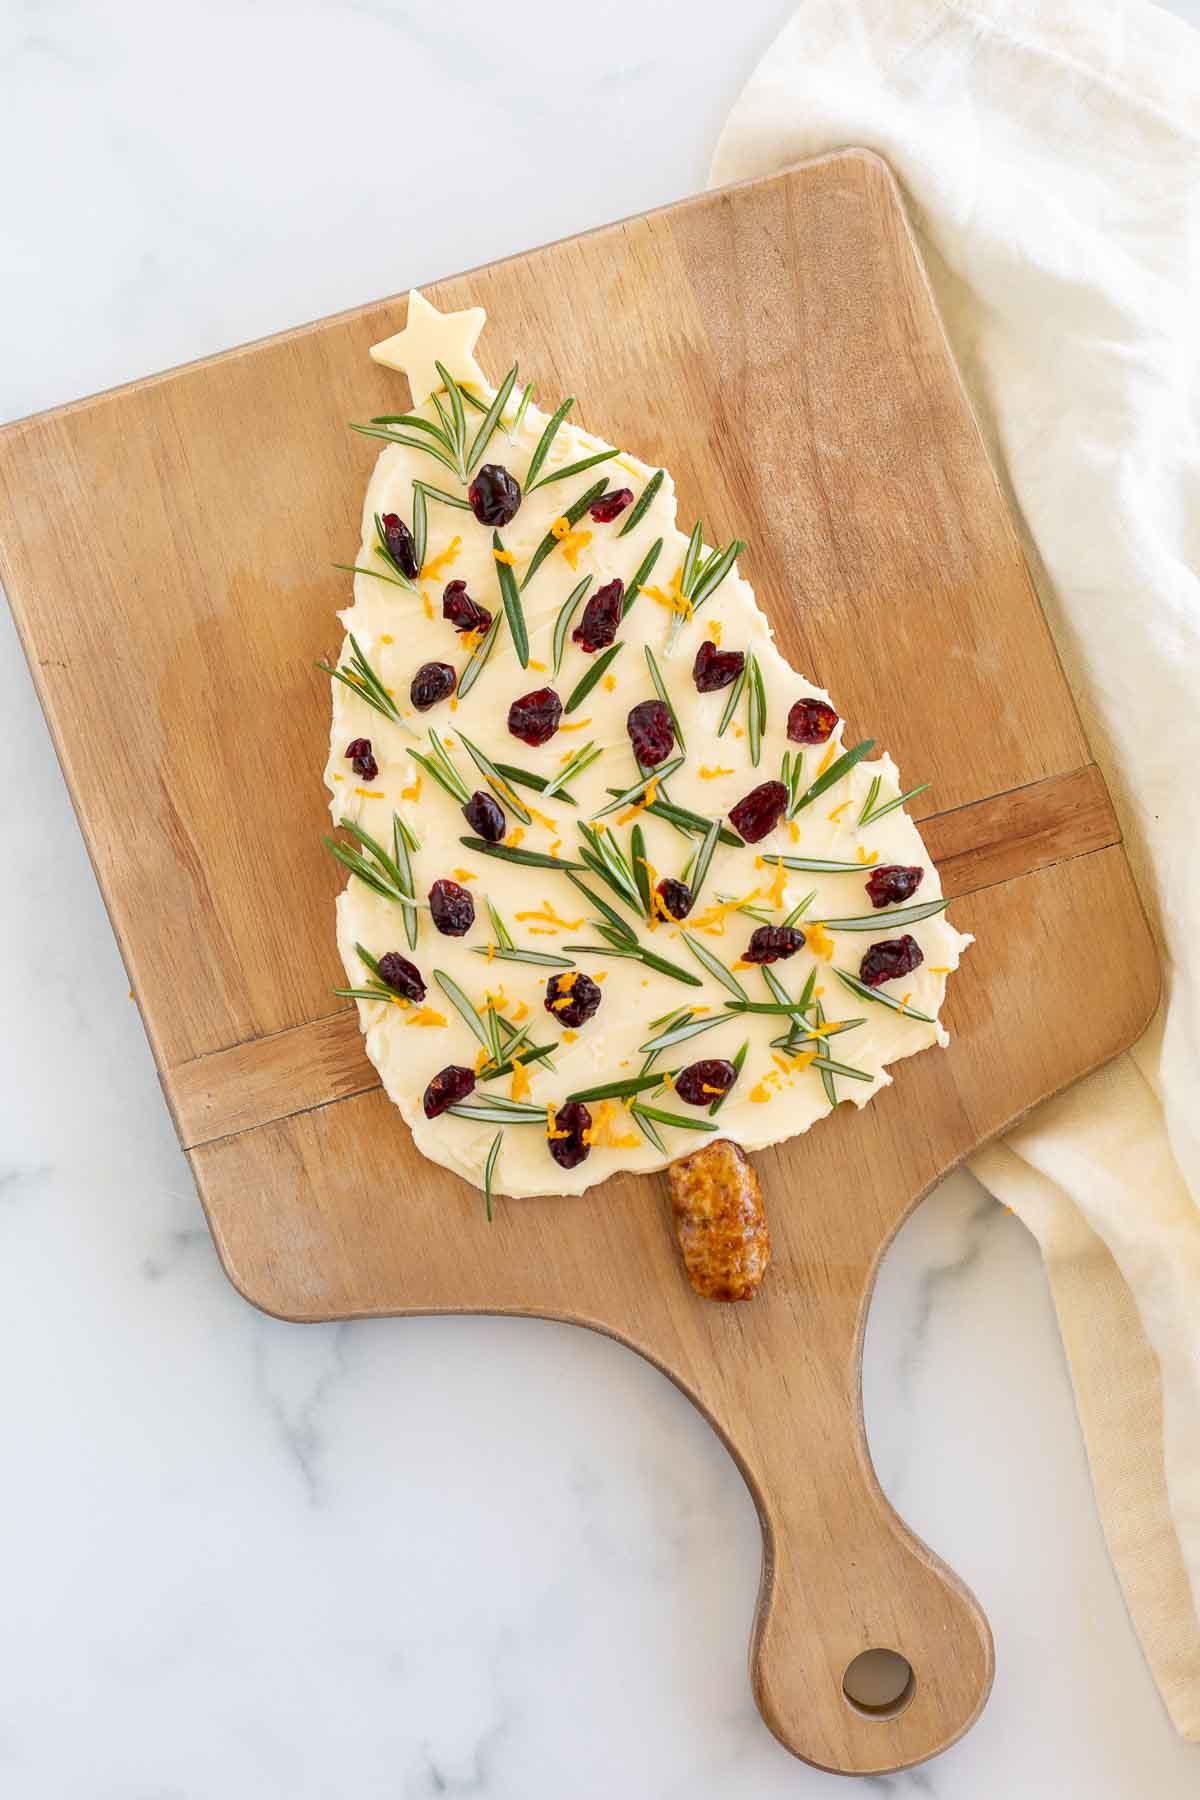 A butter board shaped into a Christmas tree placed on a wooden board TeamJiX